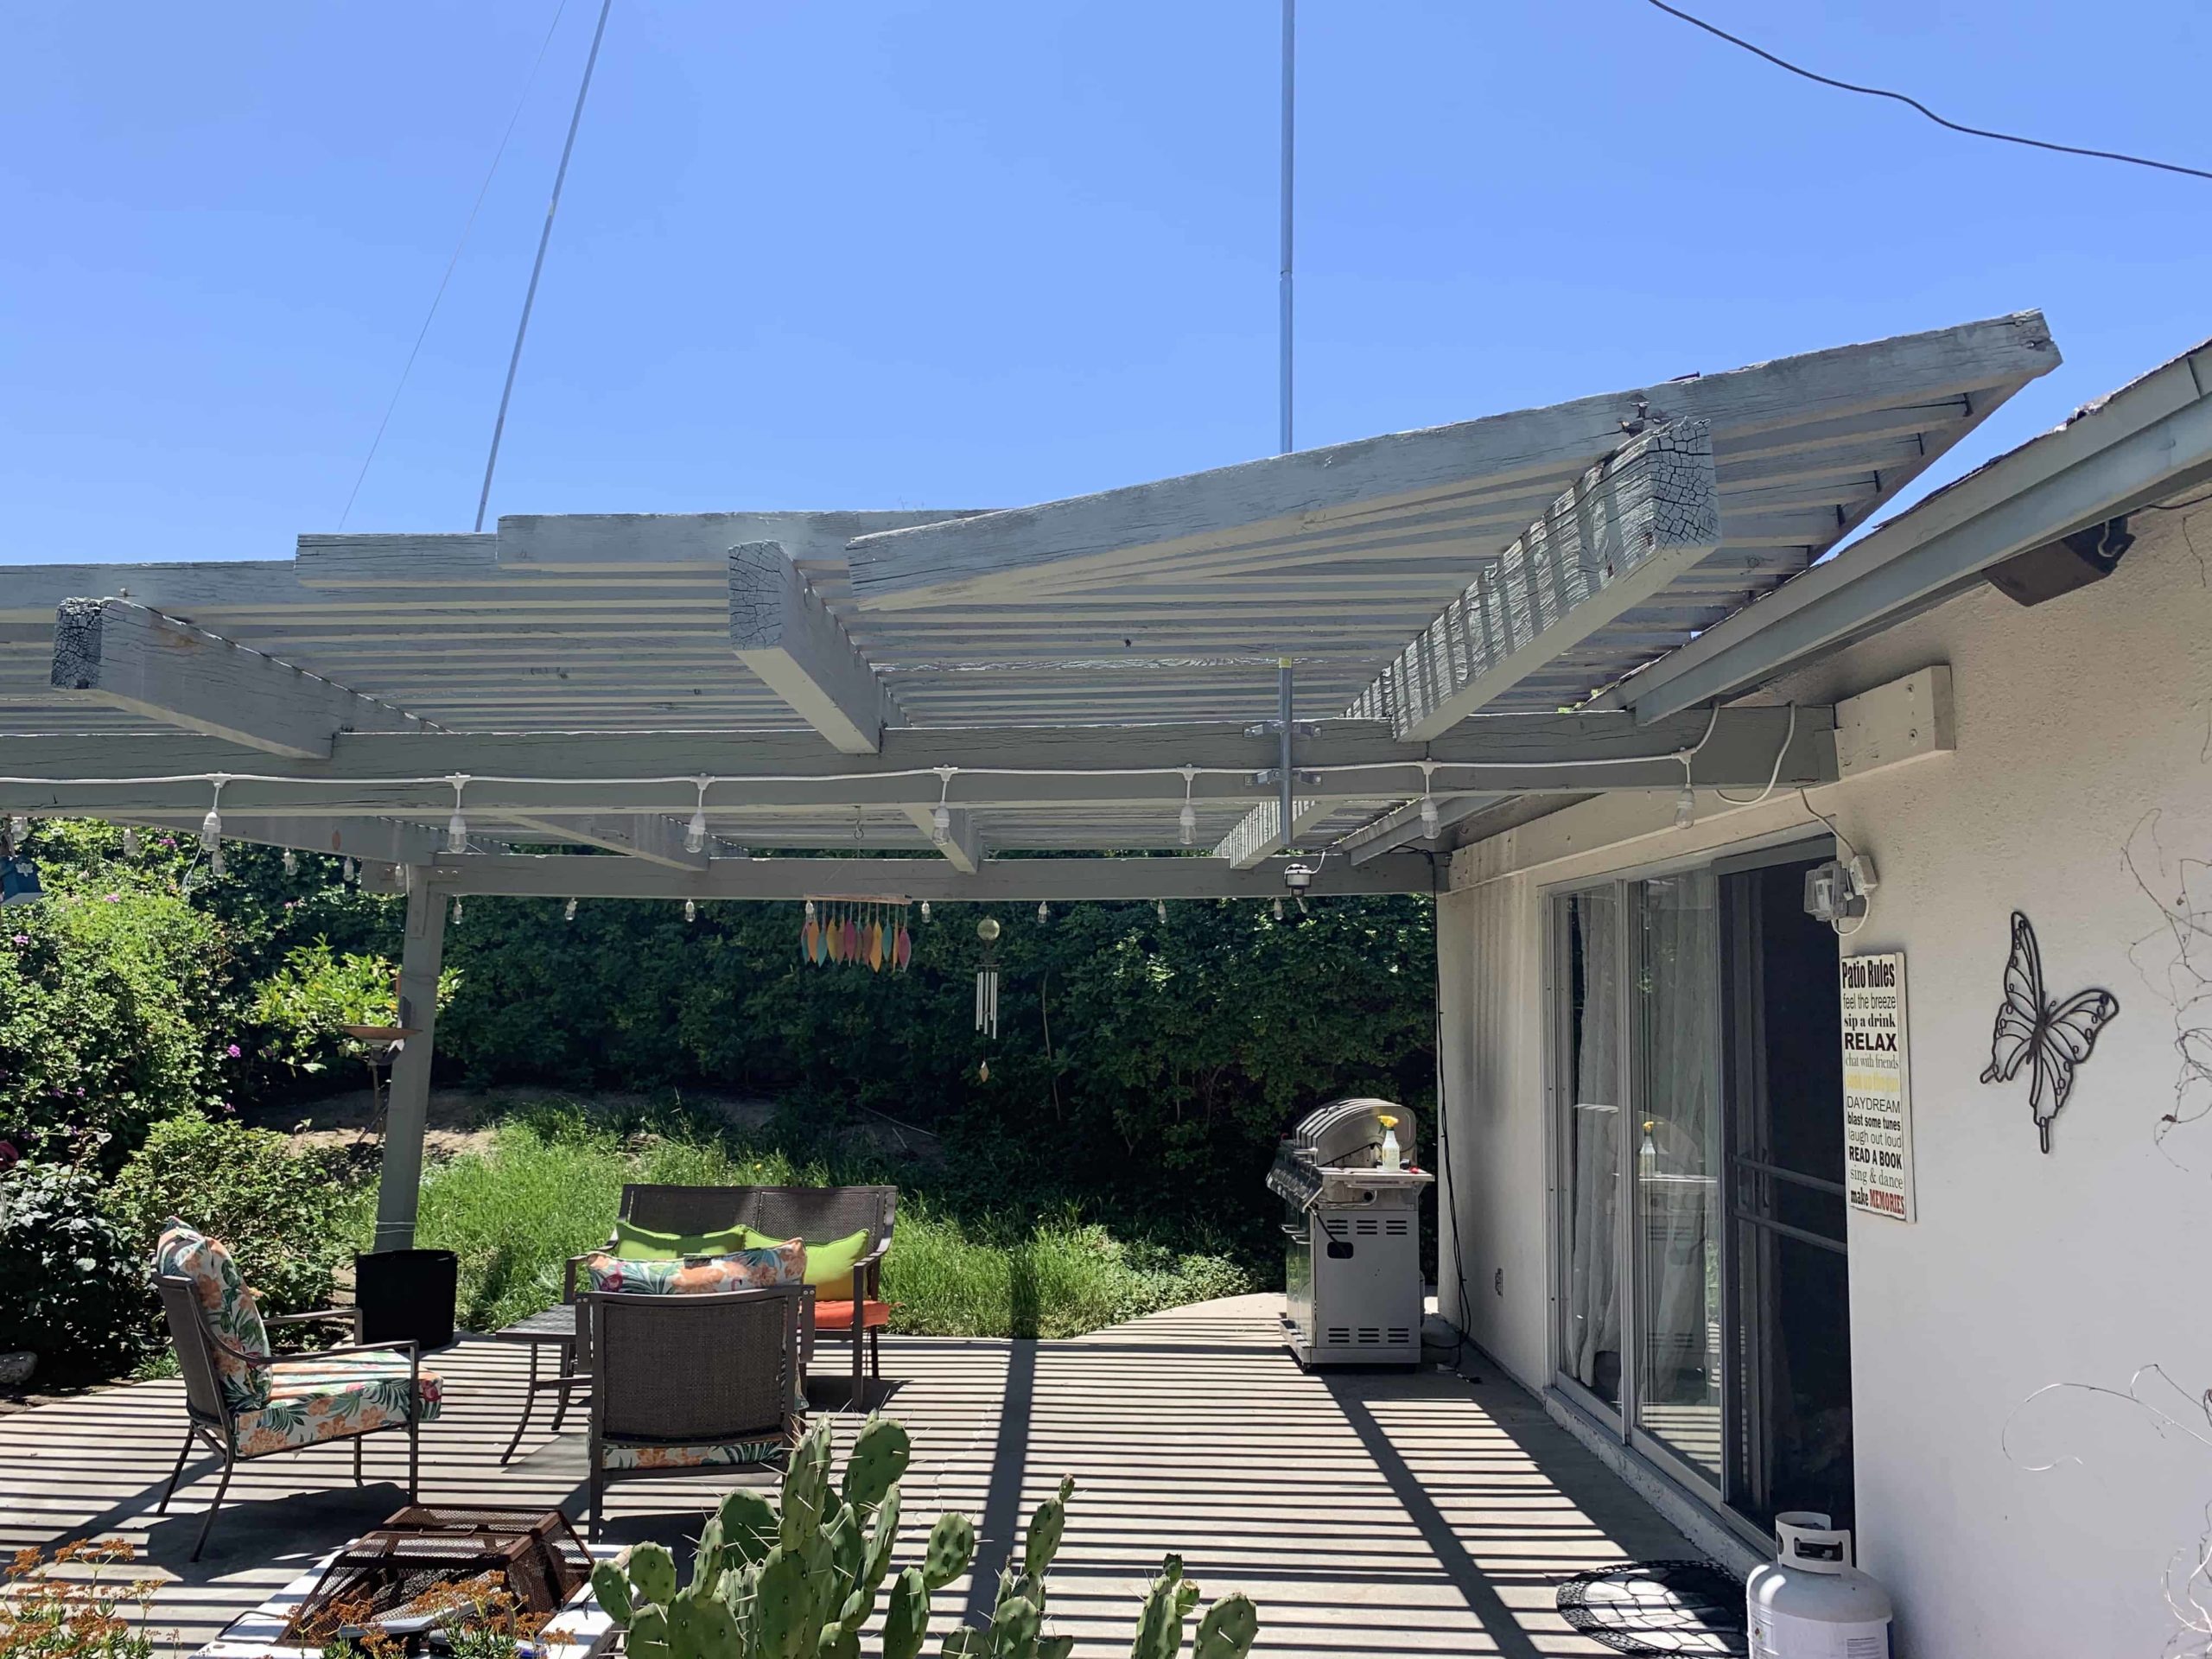 Alumawood Patio Covers in Mission Viejo, Remove & Replace